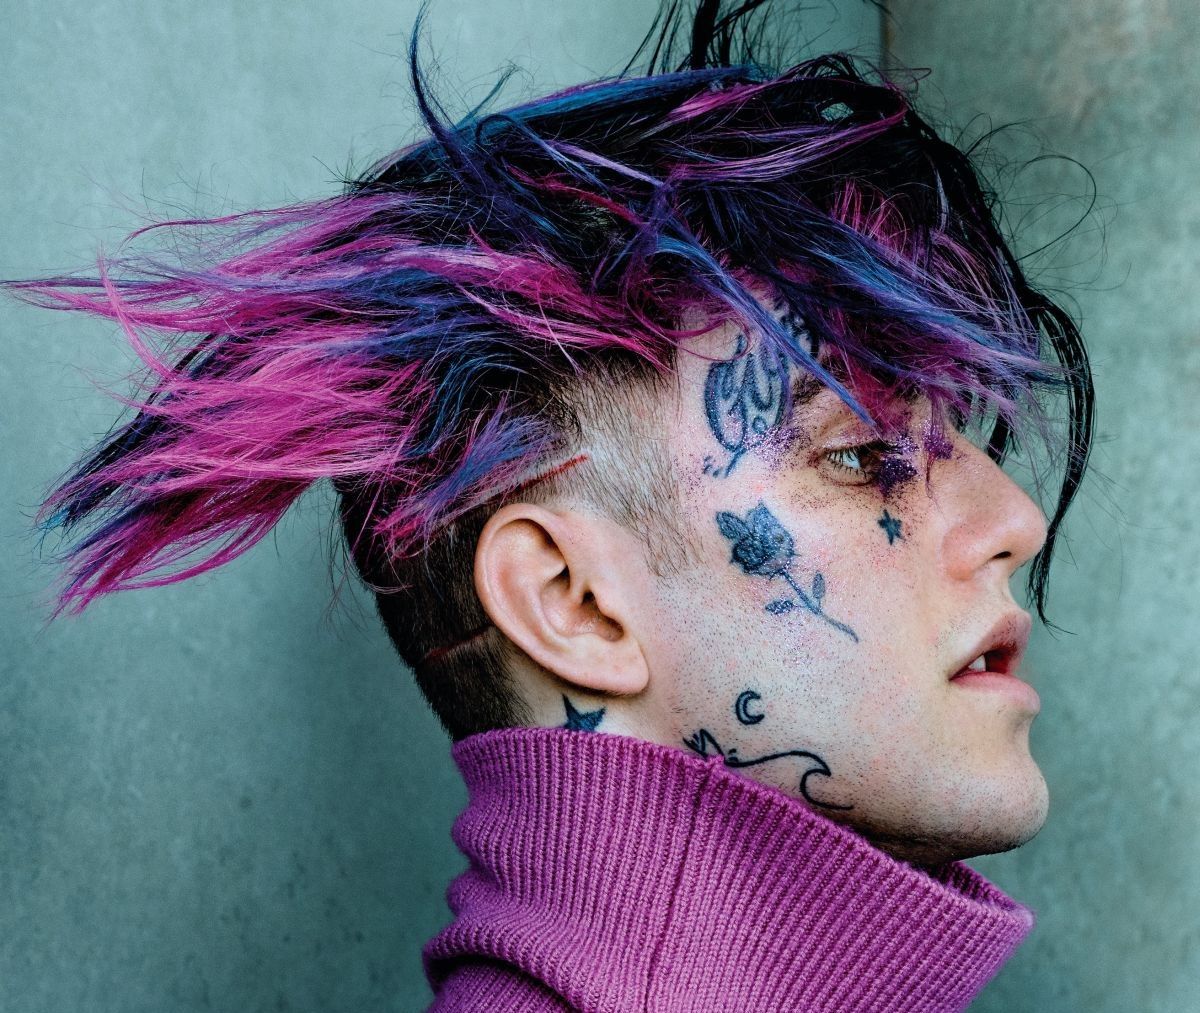 Why Lil Peep's Music Mattered in Trump's America